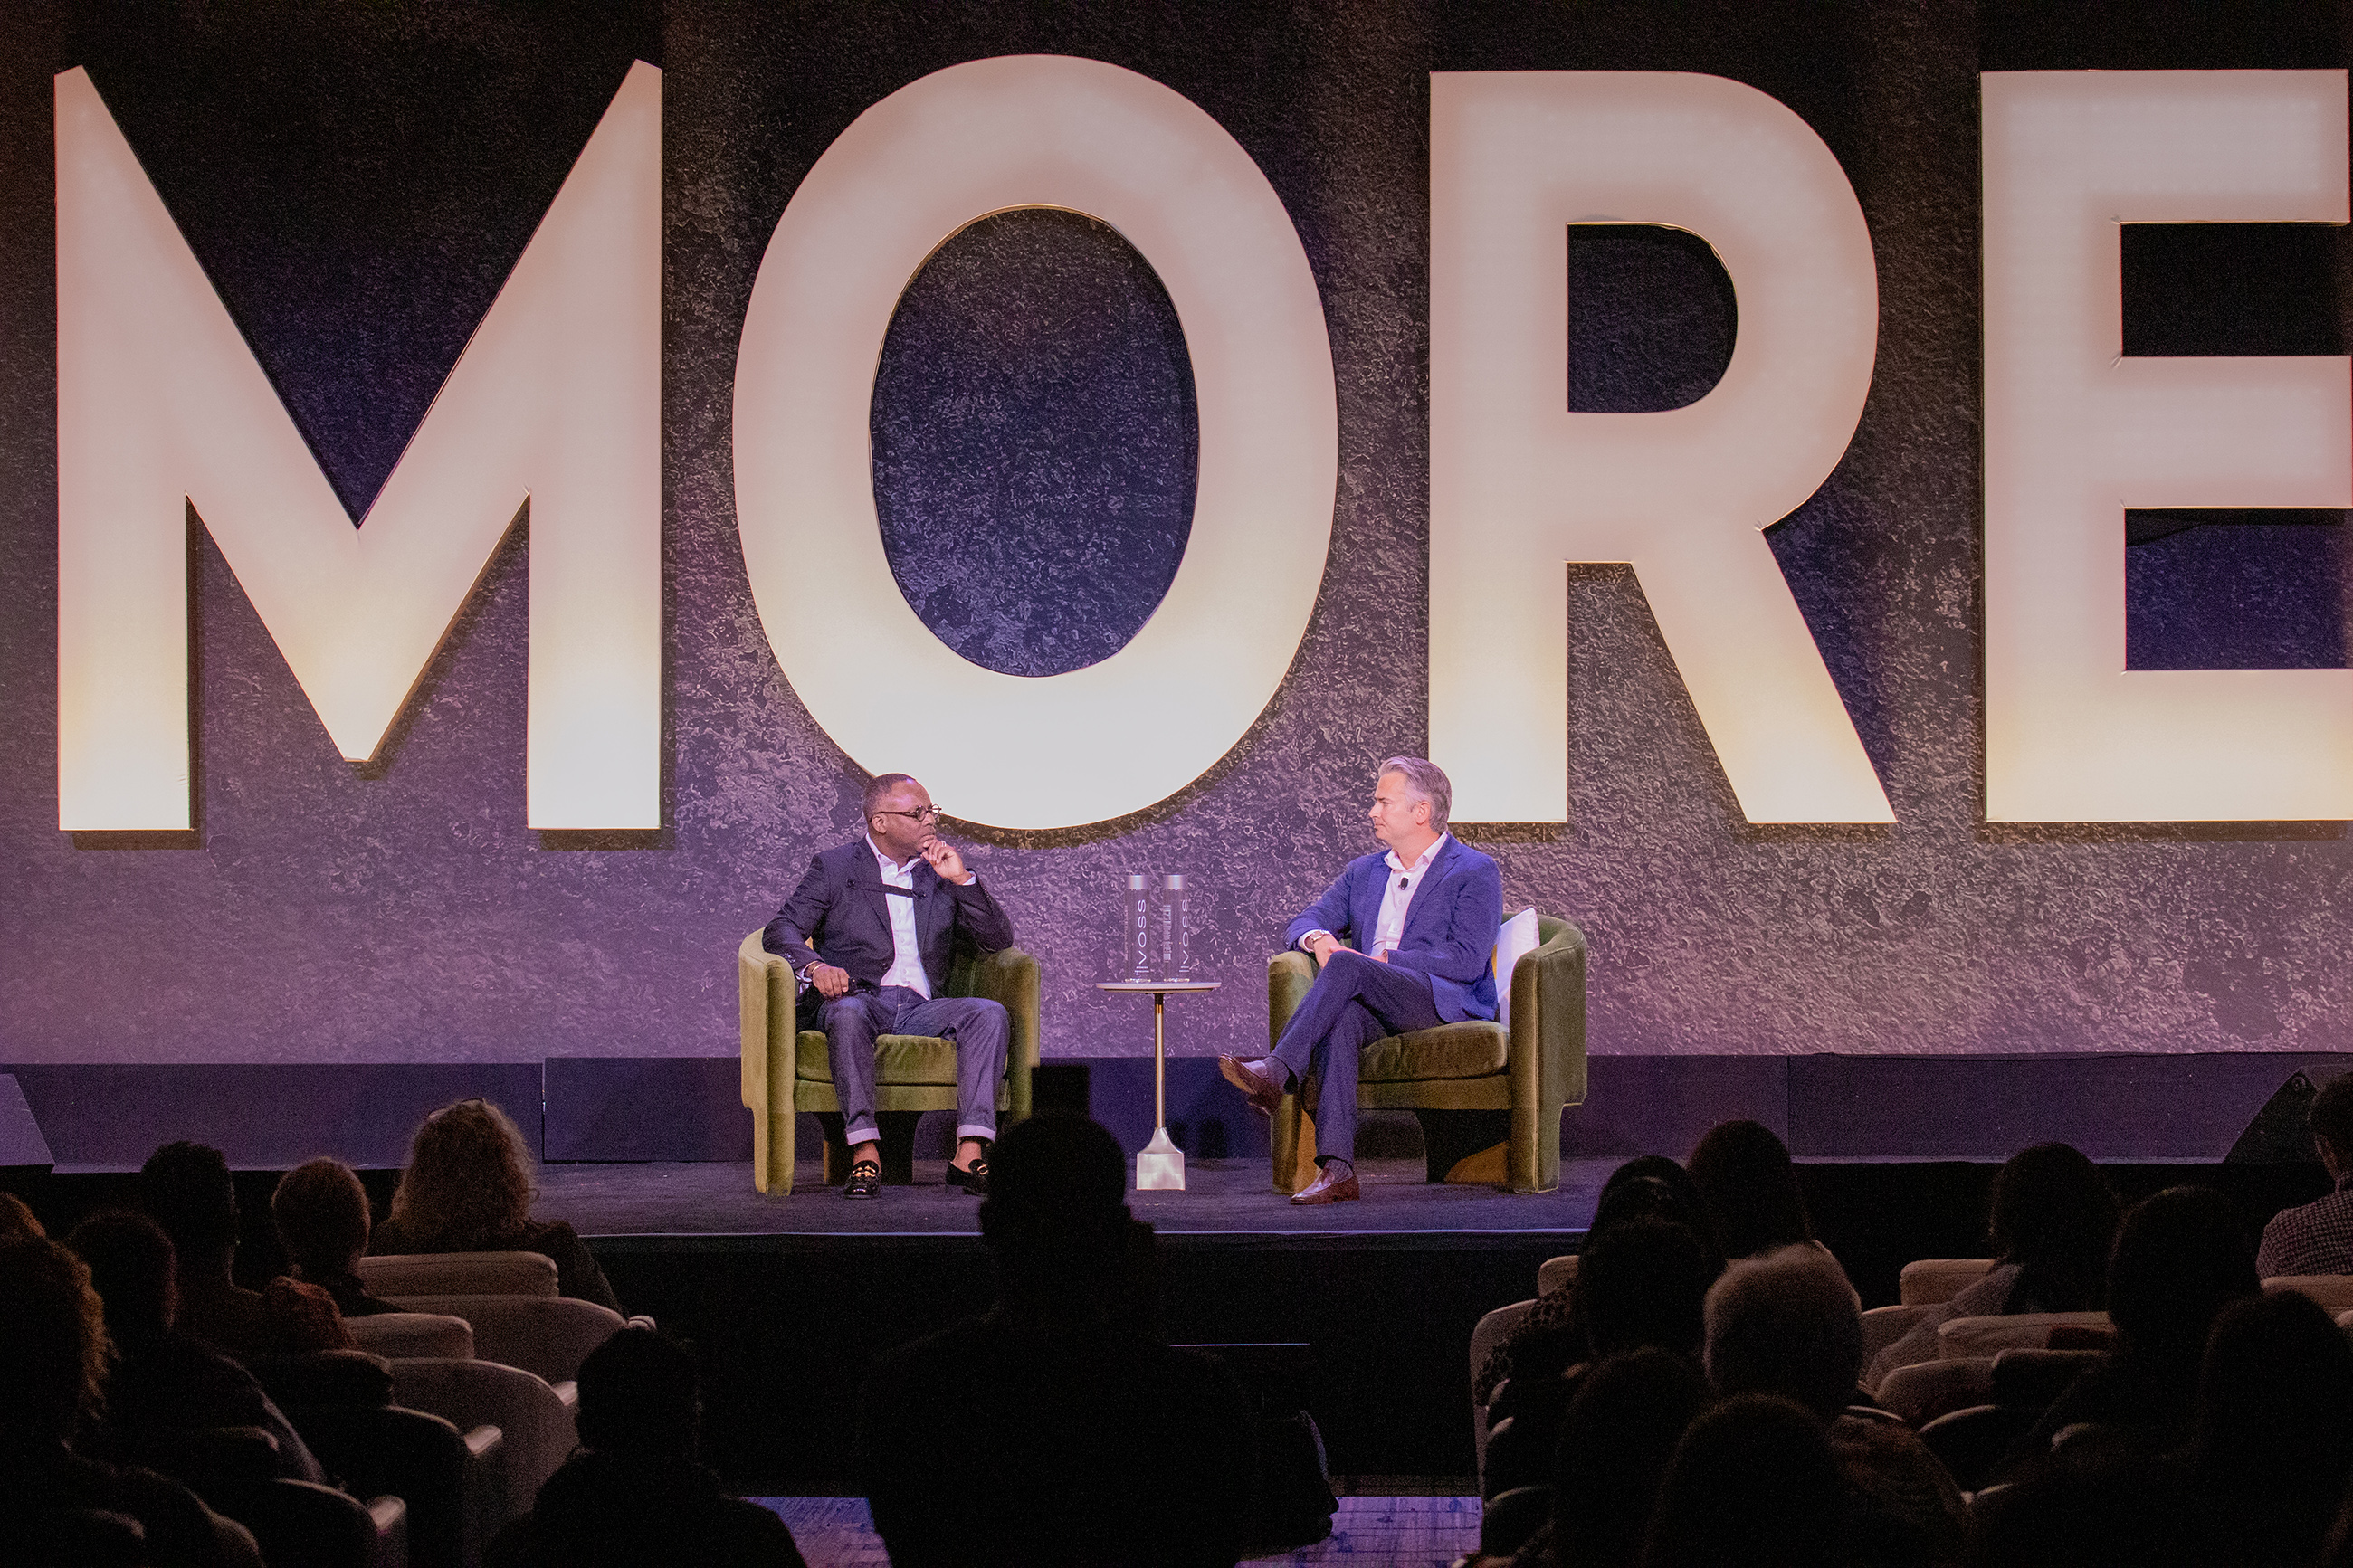 Synchrony’s Chief Diversity, Inclusion and Corporate Responsibility Officer Michael Matthews (left) and Synchrony CEO Brian Doubles (right) highlighted the company’s progress in advancing equity at its 2023 Global Diversity Experience. This year’s theme highlighted the need to see, feel and do “more” to drive meaningful and lasting change. (Photo credit: TheWrightVision for Synchrony) 